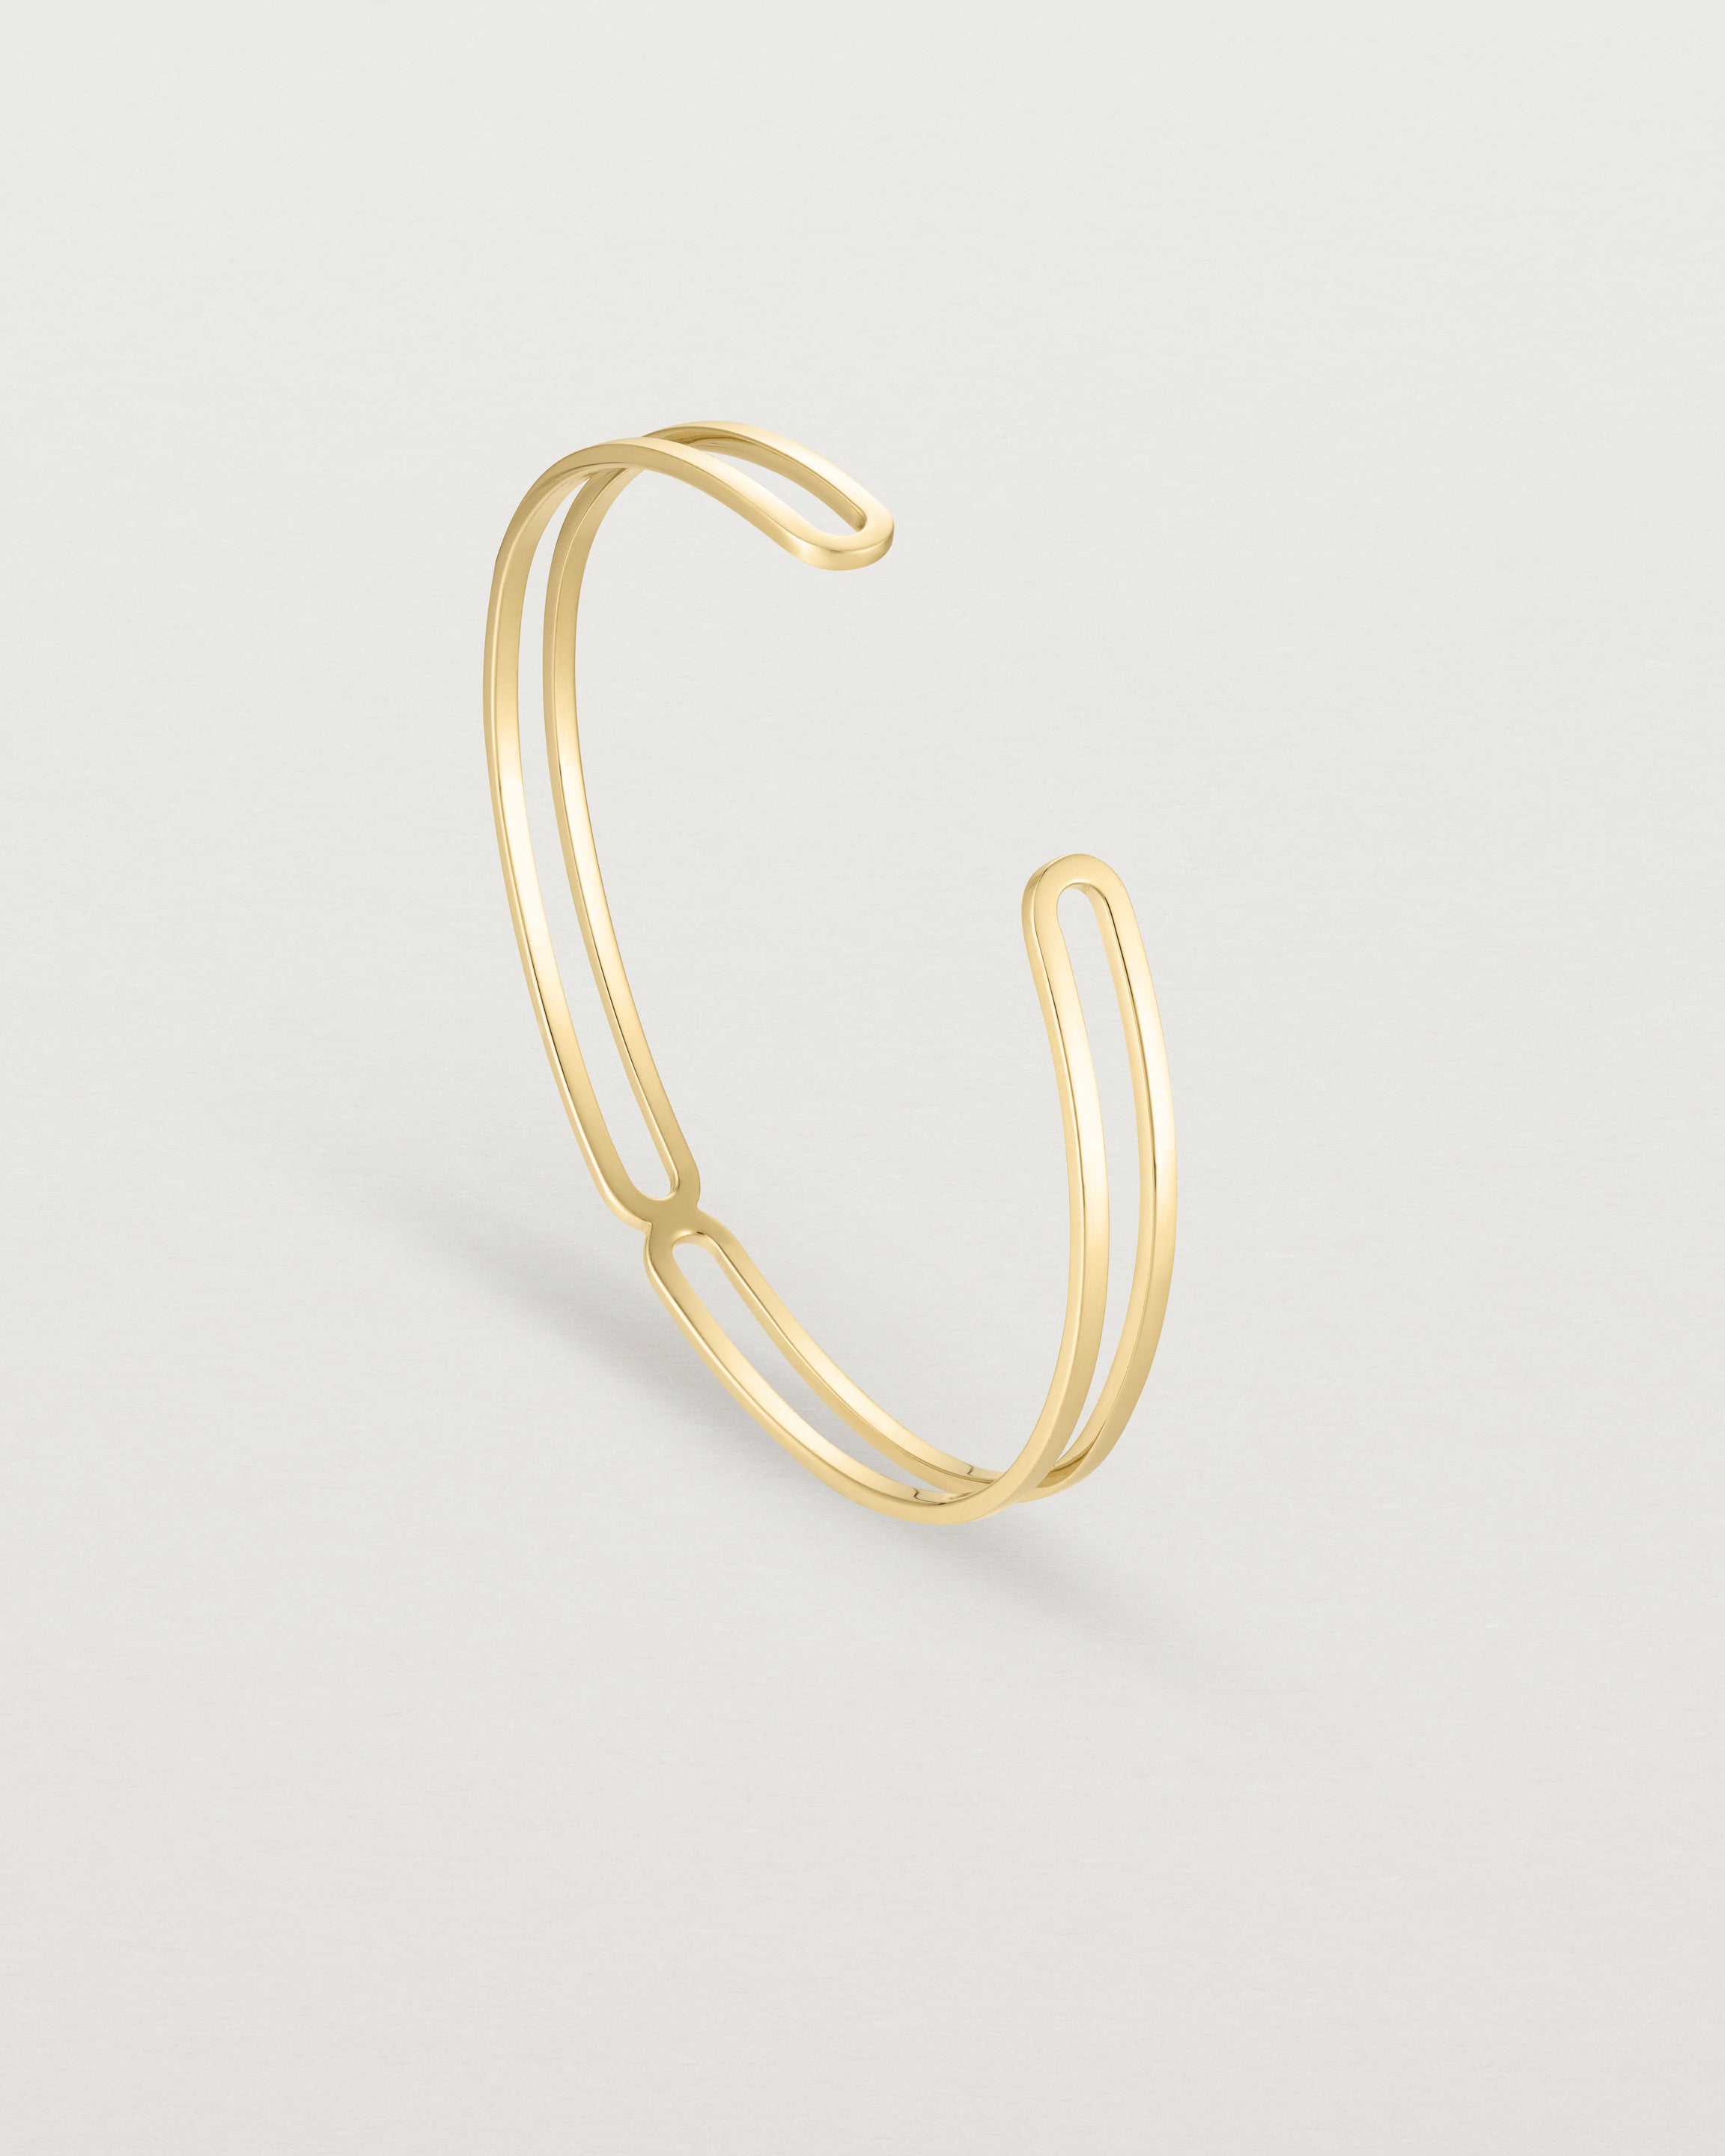 Standing view of the Ailing Cuff Bangle in Yellow Gold.